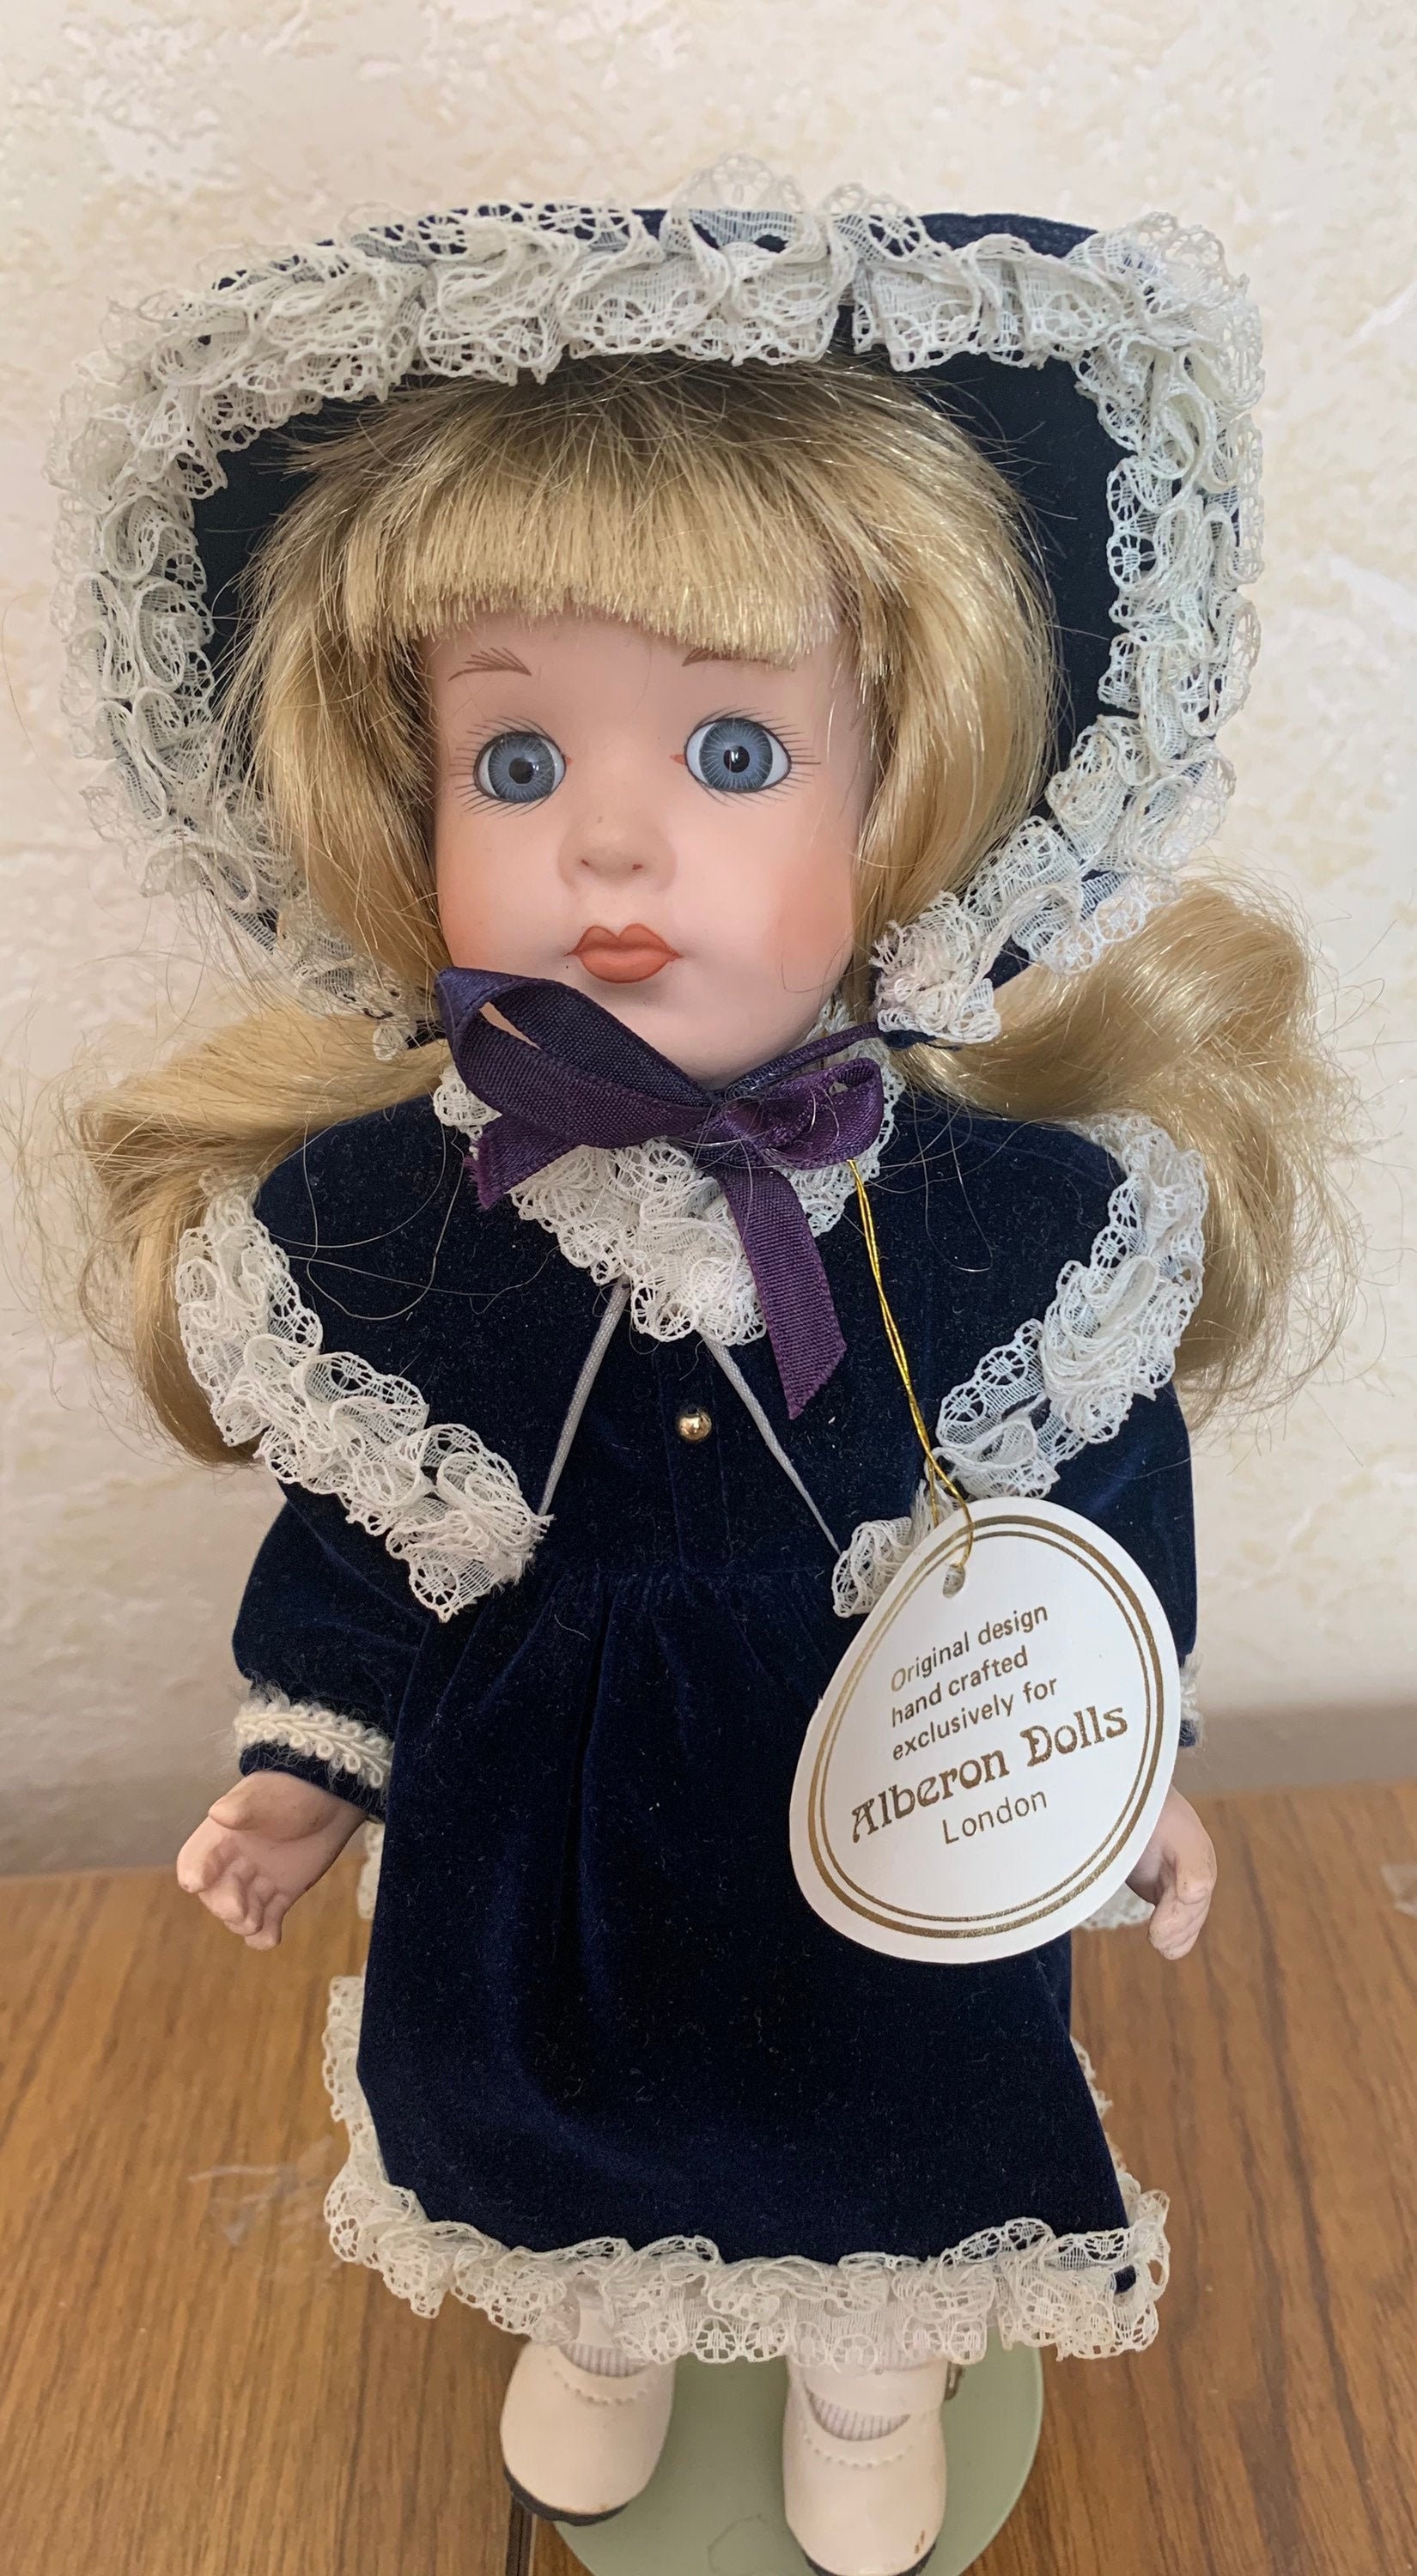 Porcelain Doll From the Alberon Collection - Etsy